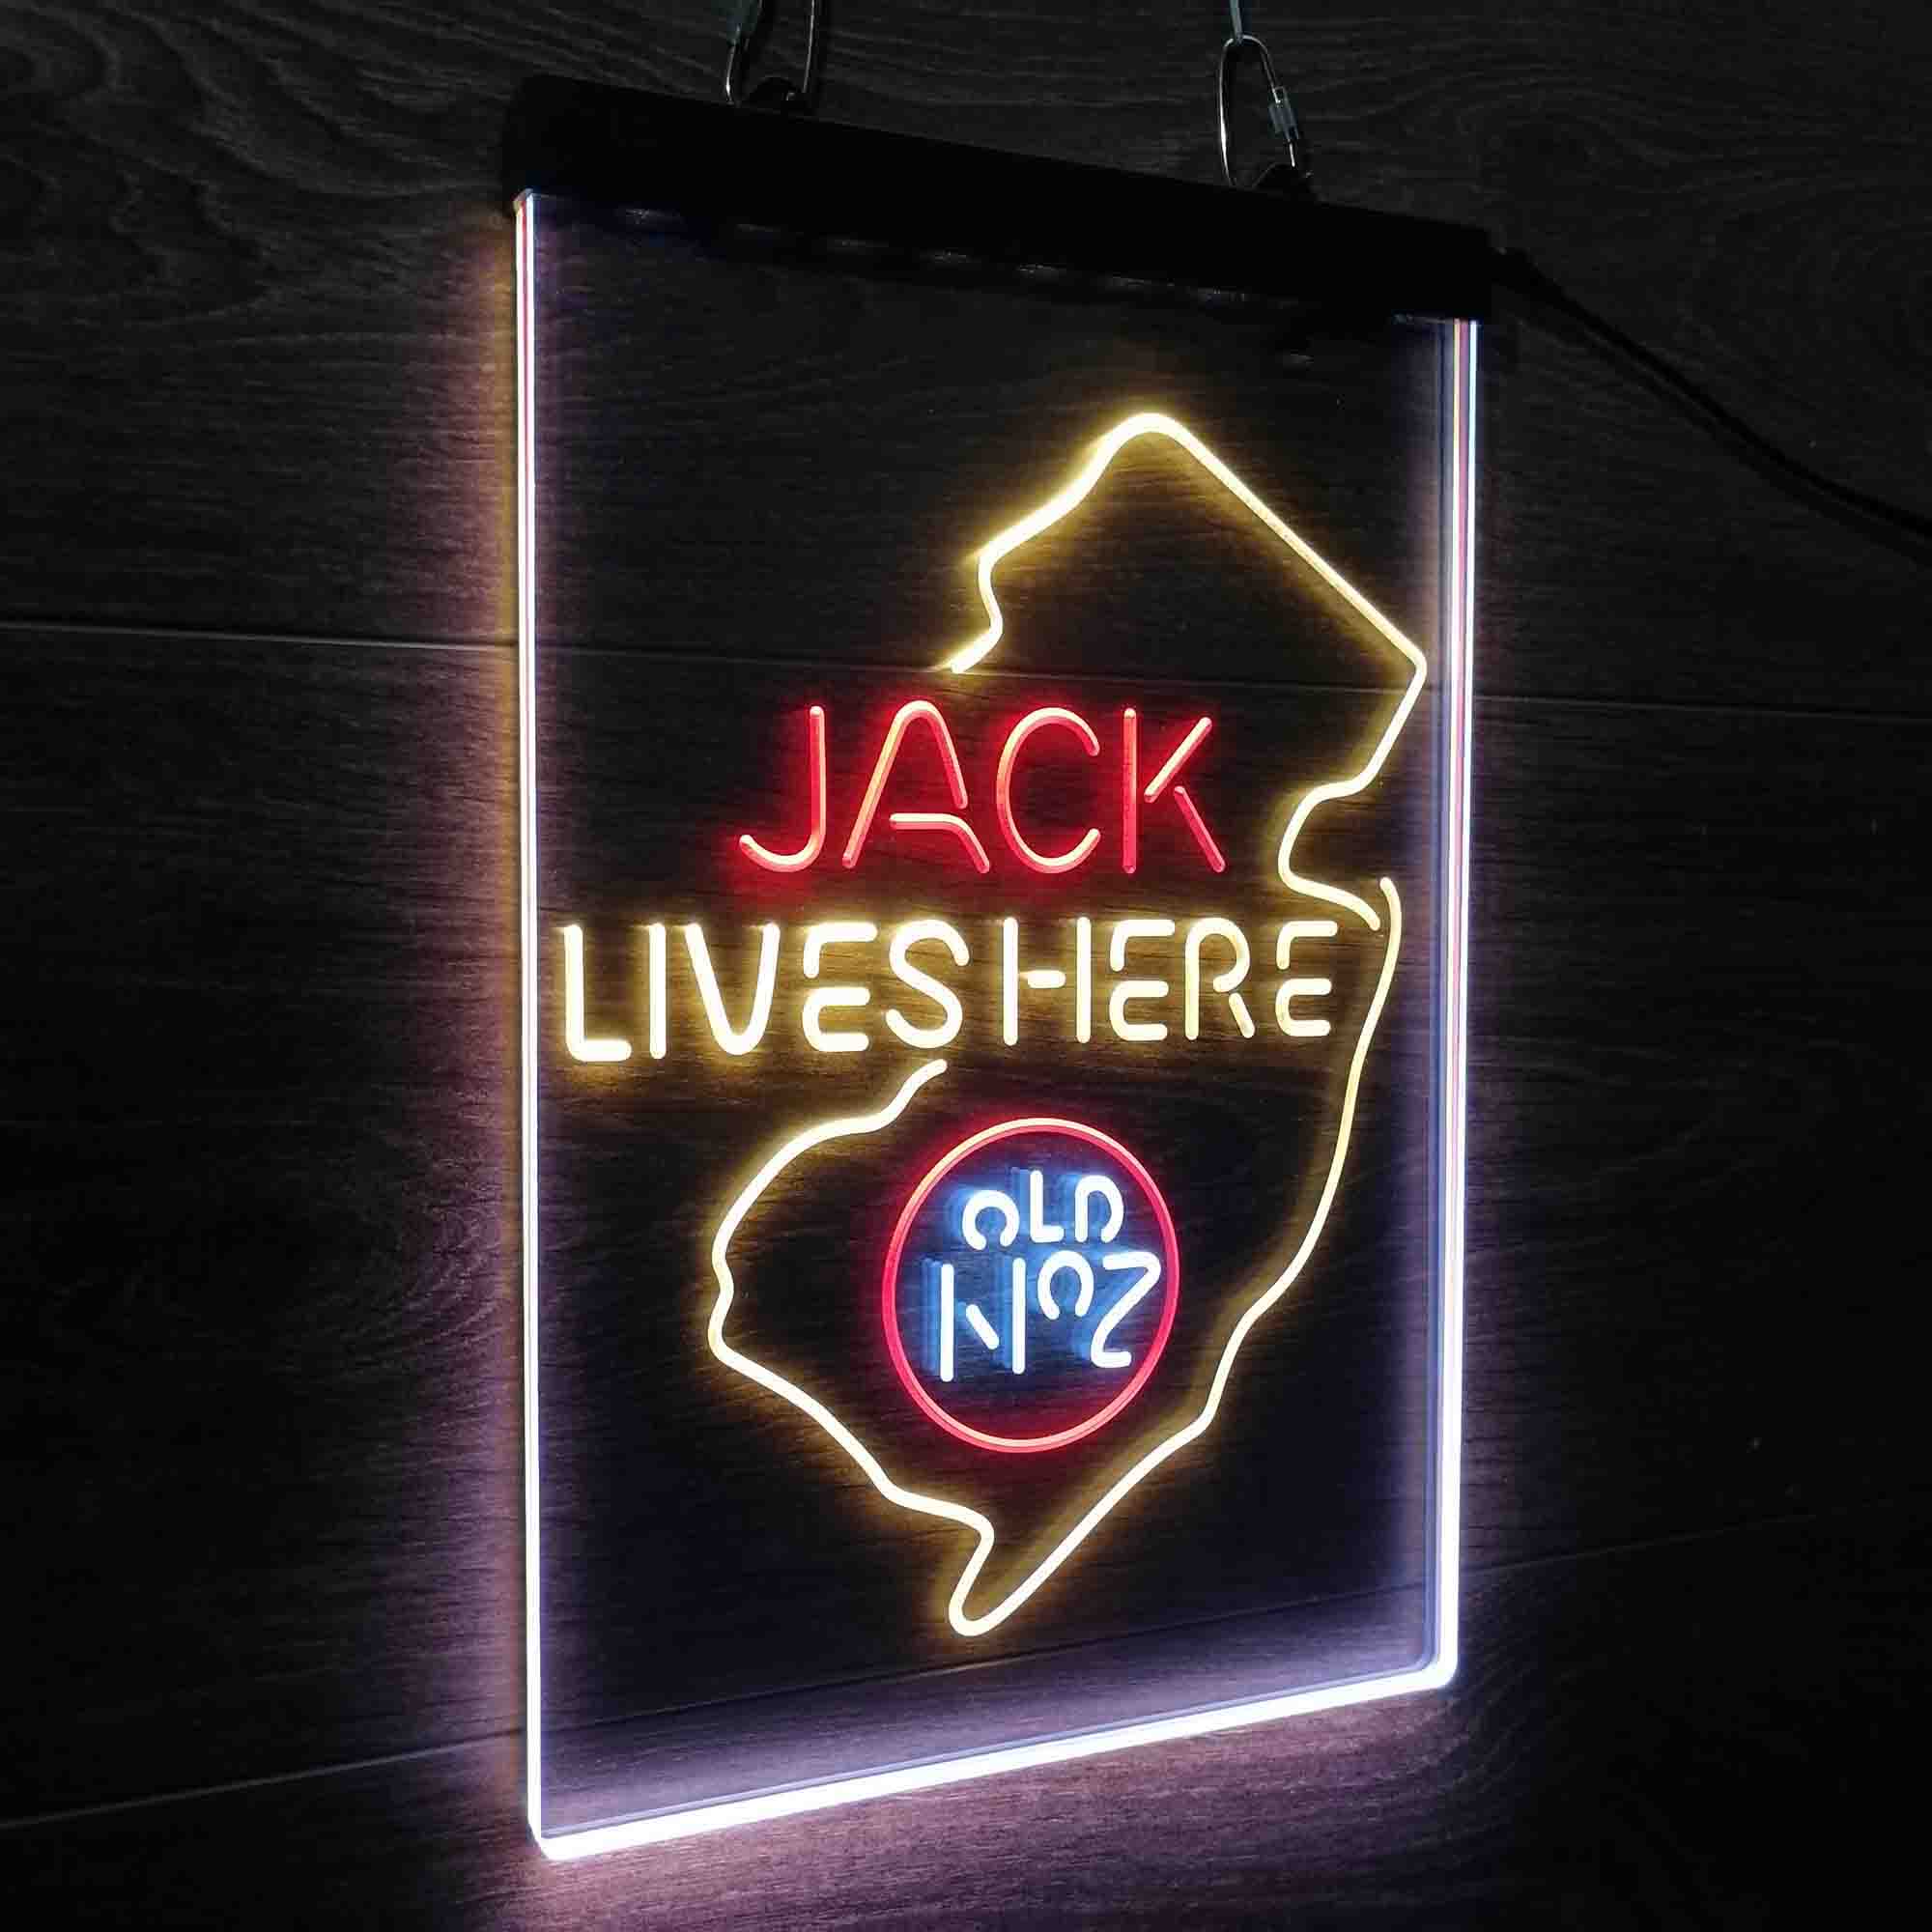 New Jersey Jack Lives Here Neon 3-Color LED Sign